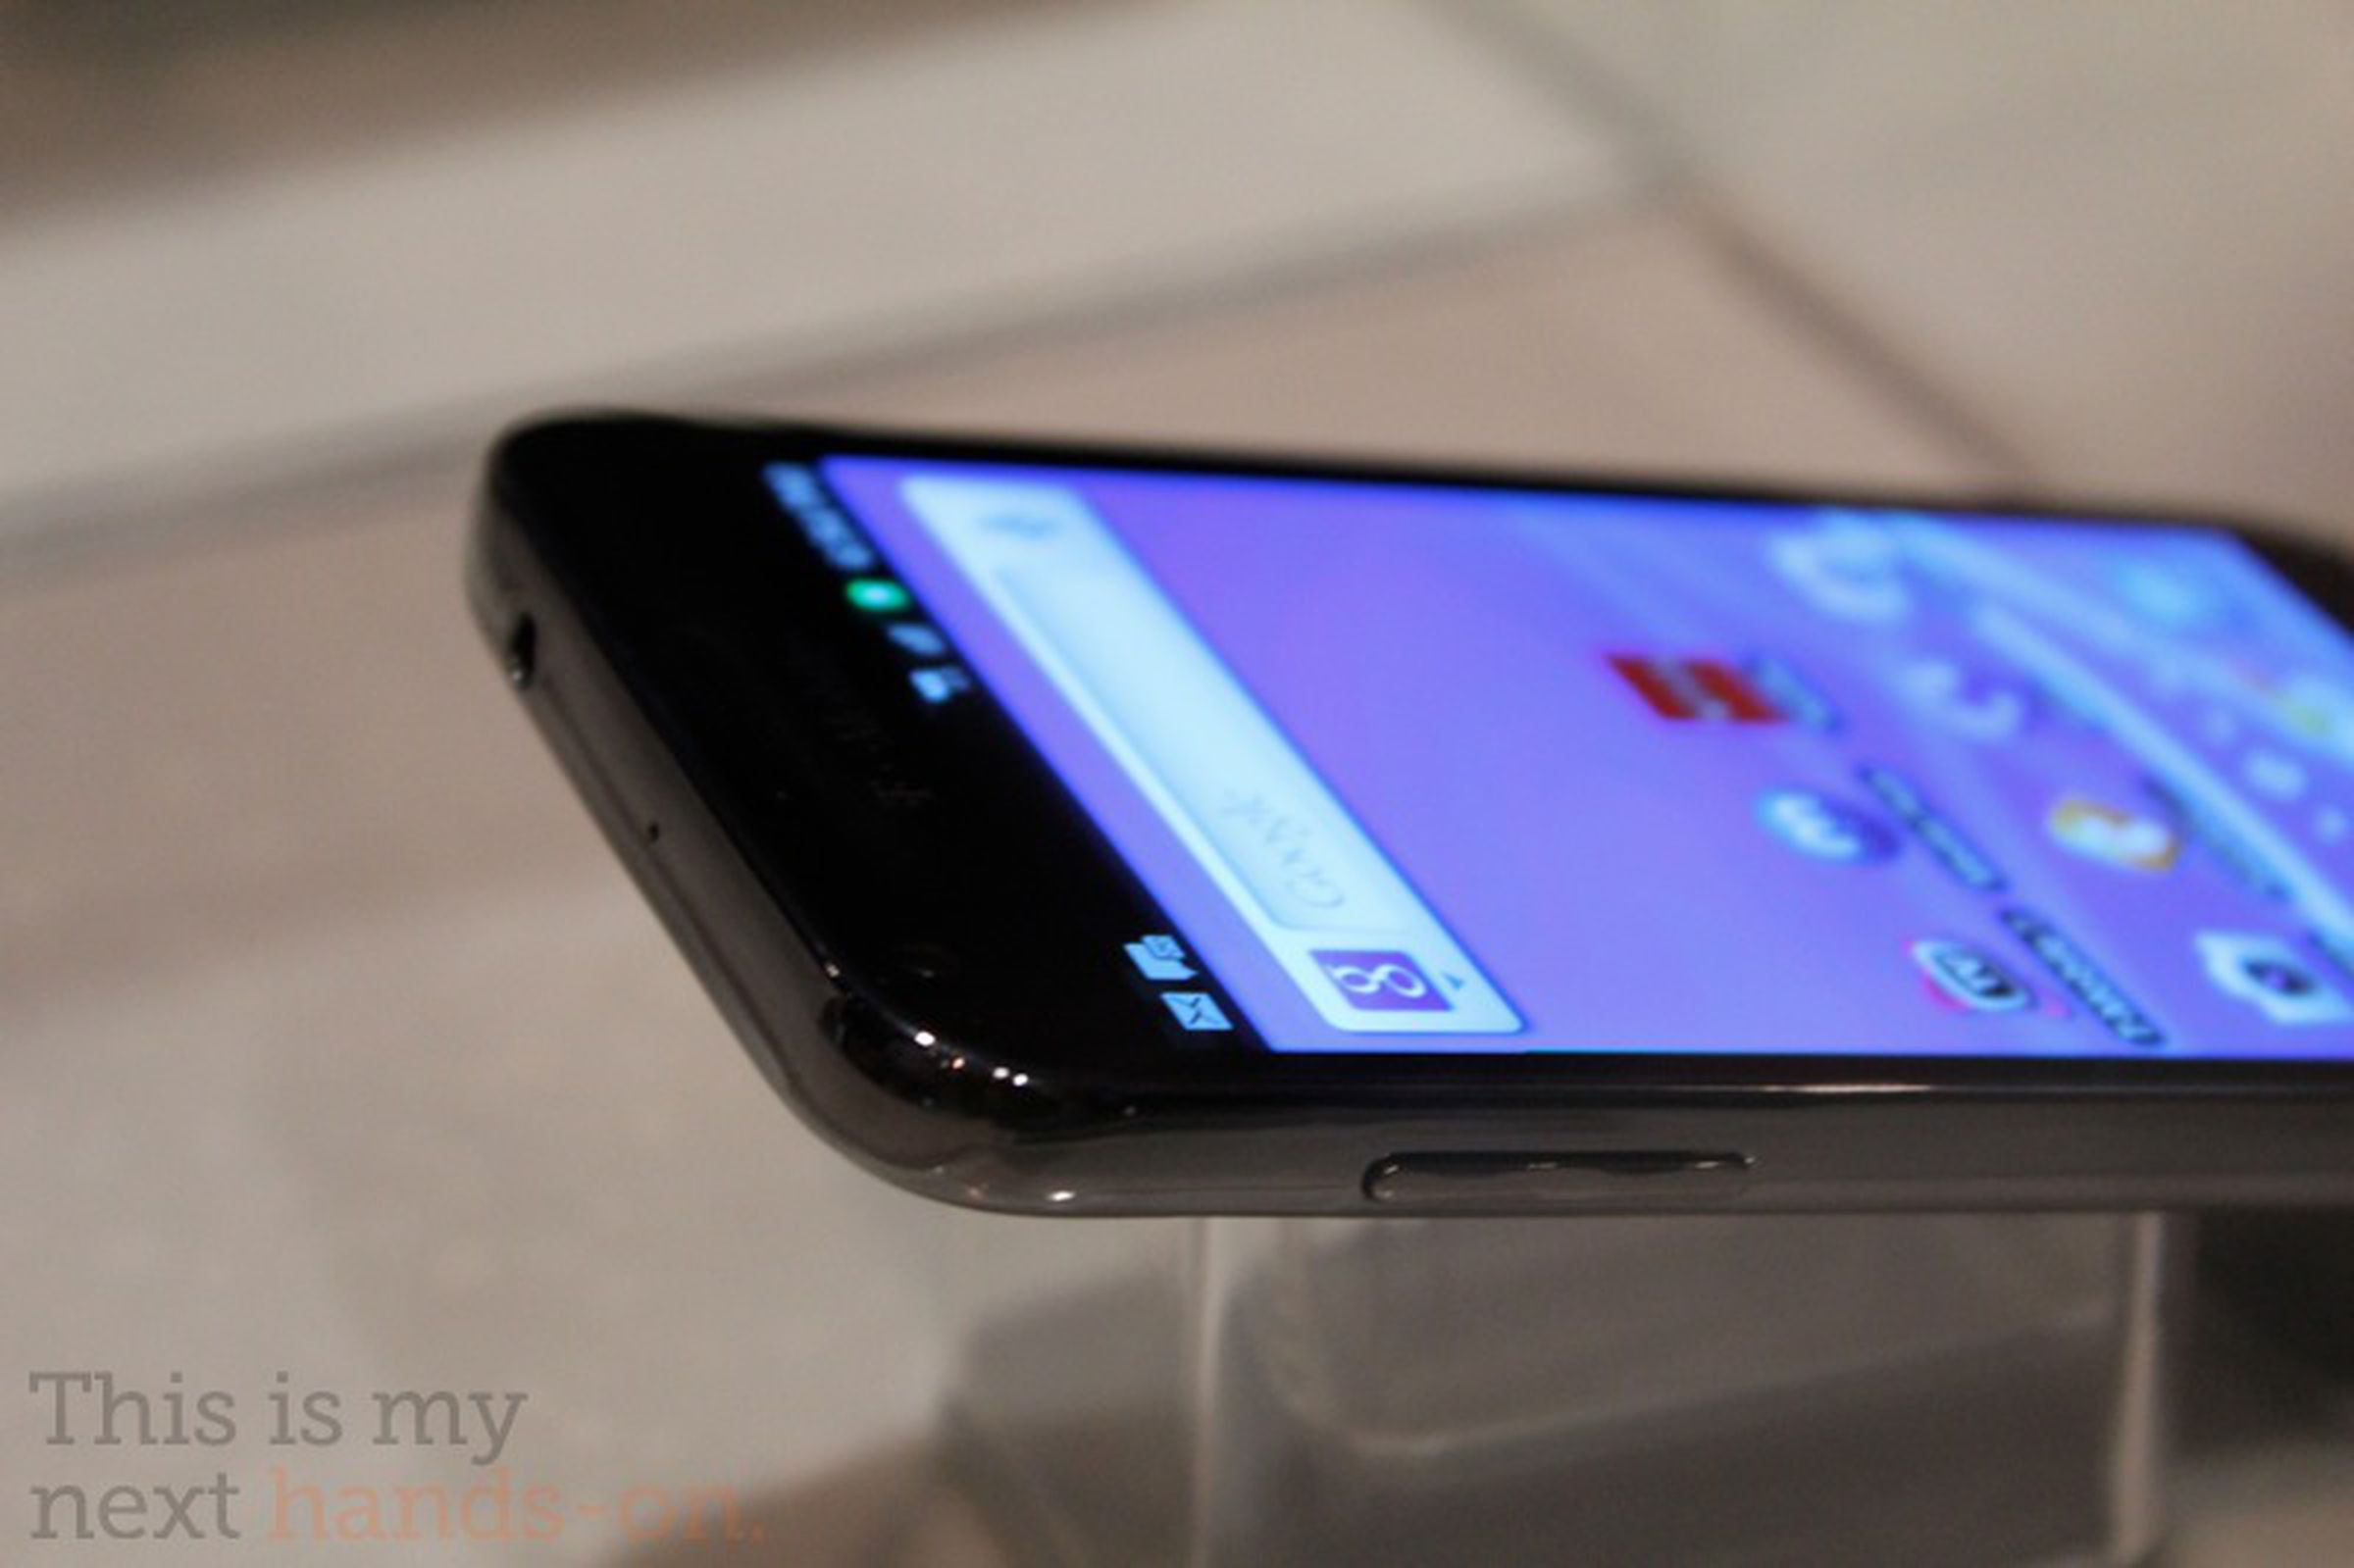 Samsung Galaxy S II on T-Mobile: 4.5-inch Super AMOLED Plus screen, 8-megapixel 1080p camera, and '4G' data speeds — pictures! 